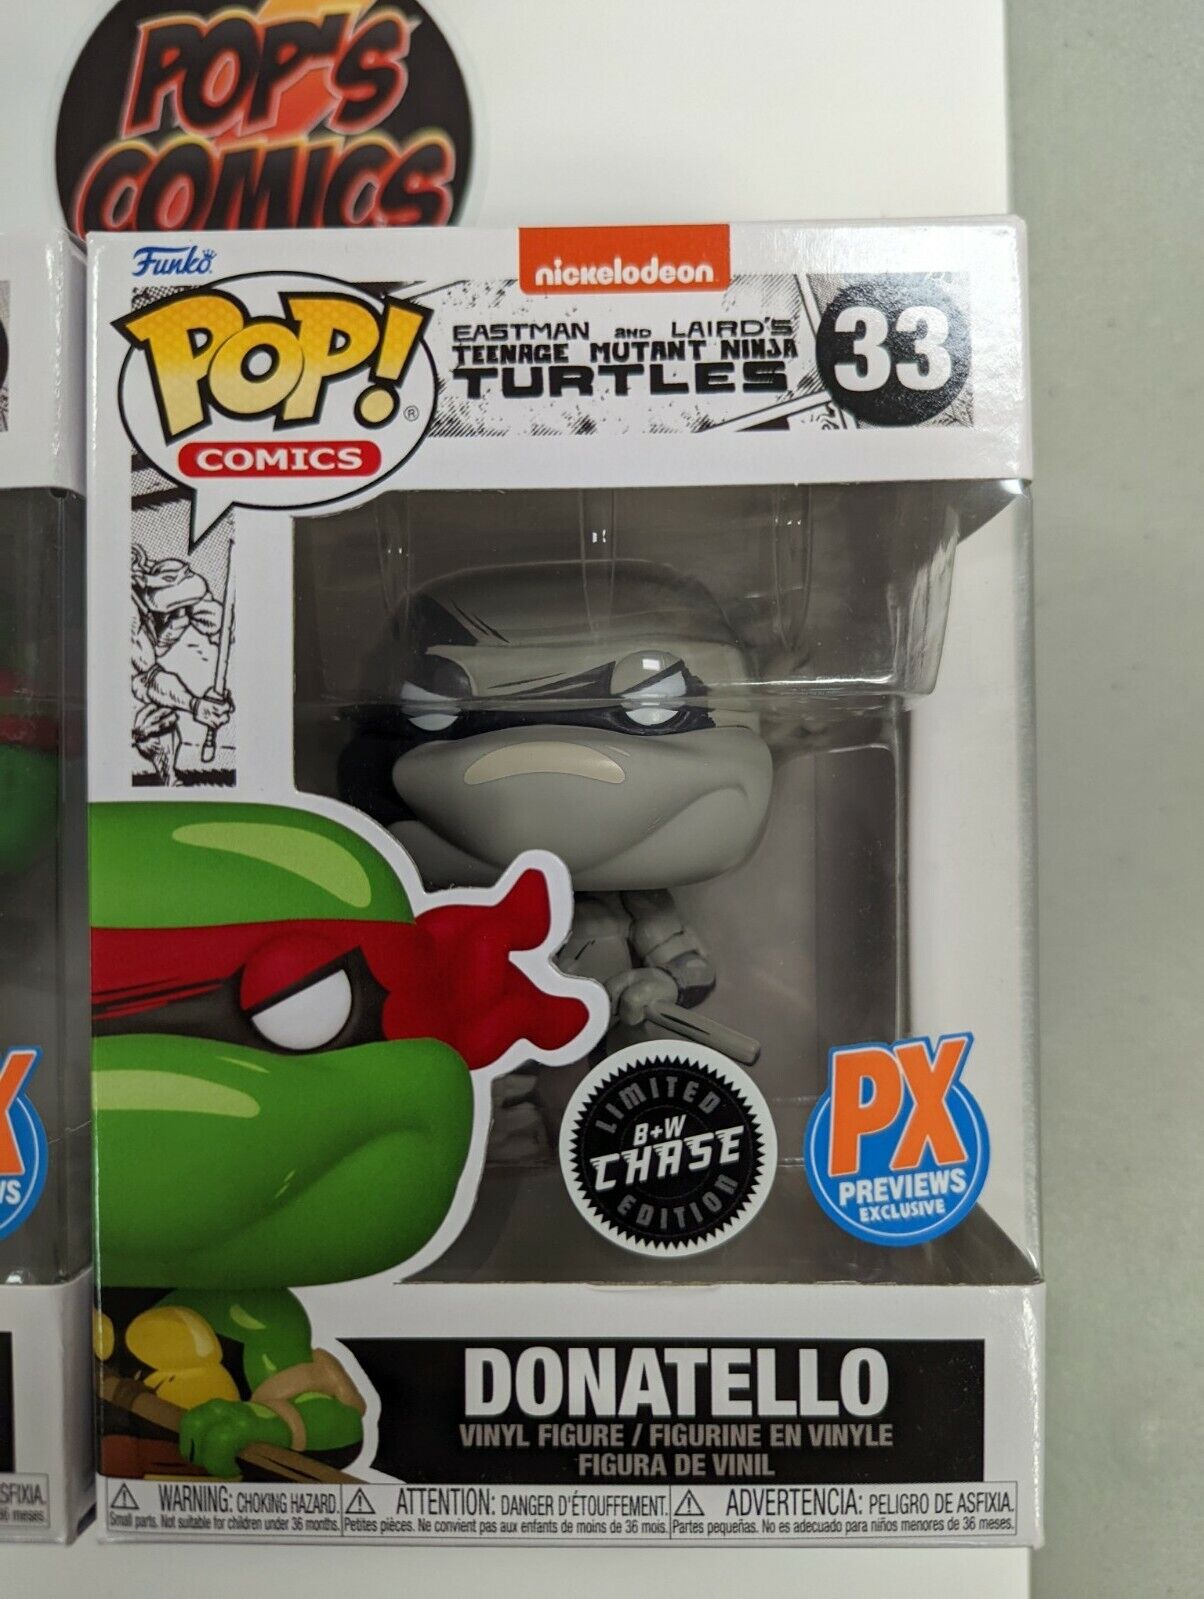 Funko Pop Set Donatello 33 Previews Exclusive & Chase TMNT Eastman and Laird